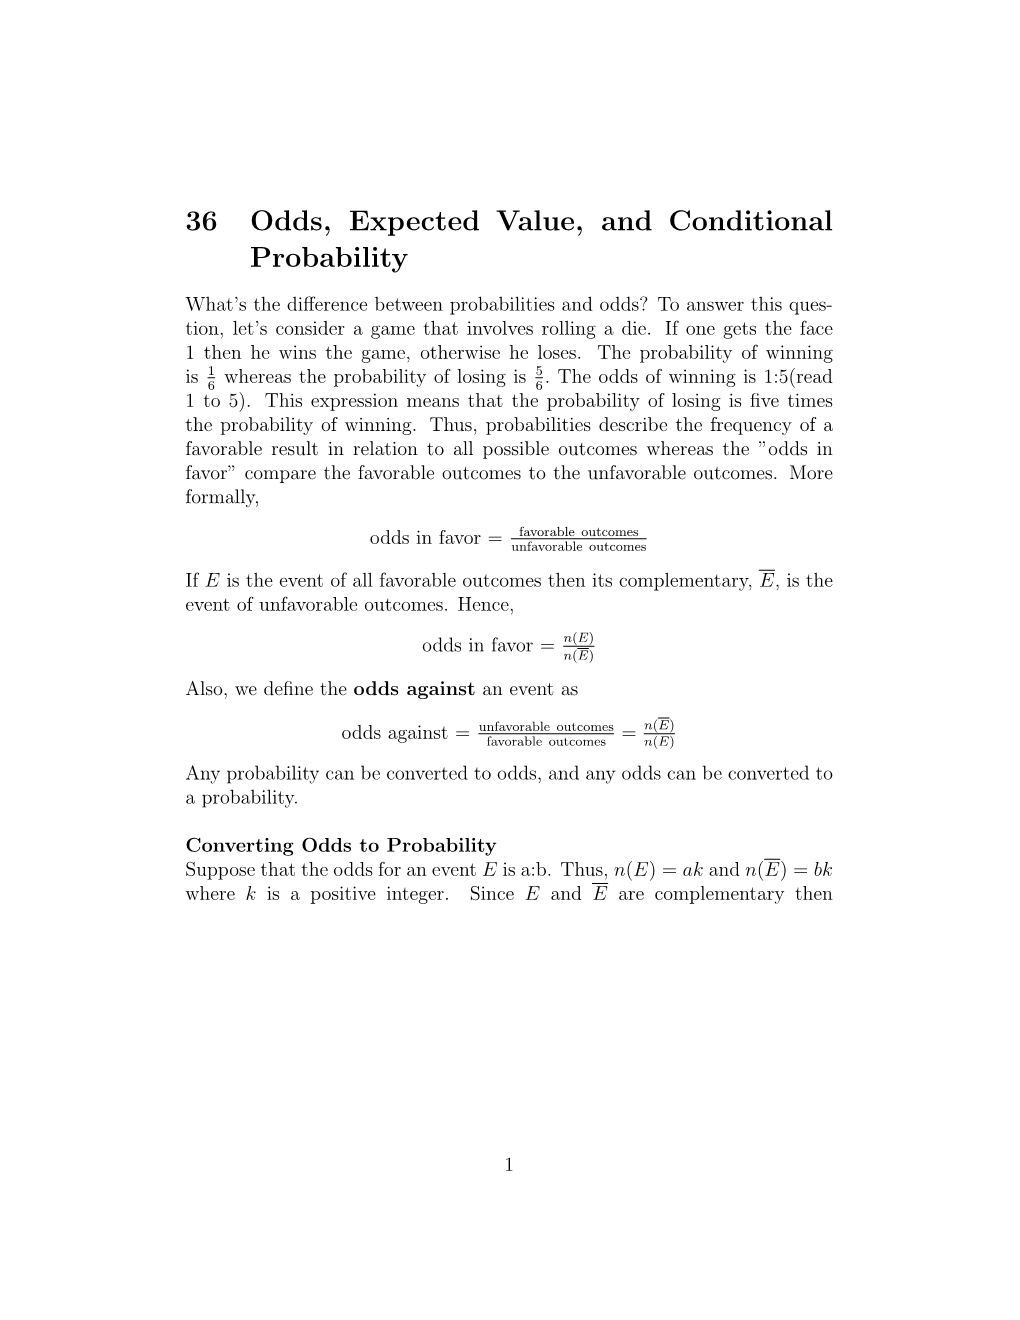 36 Odds, Expected Value, and Conditional Probability